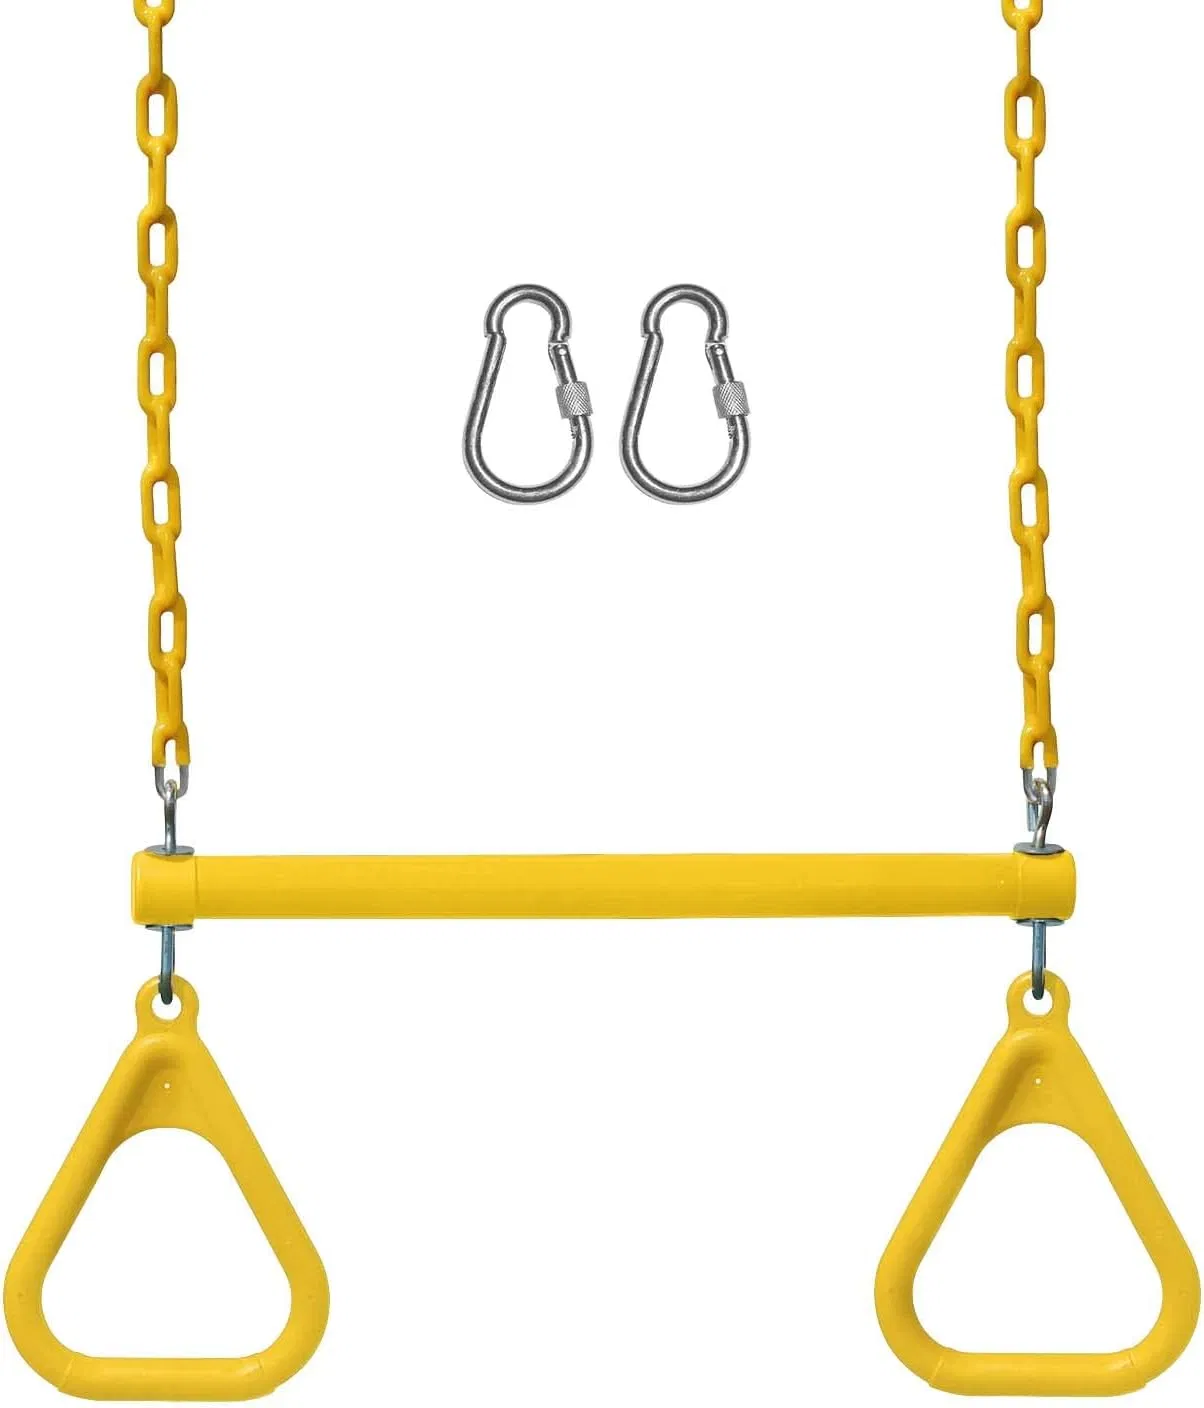 Heavy Duty Plastic Coated Chain Swing Set Accessories Gym Rings Trapeze 17inch Swing Bar